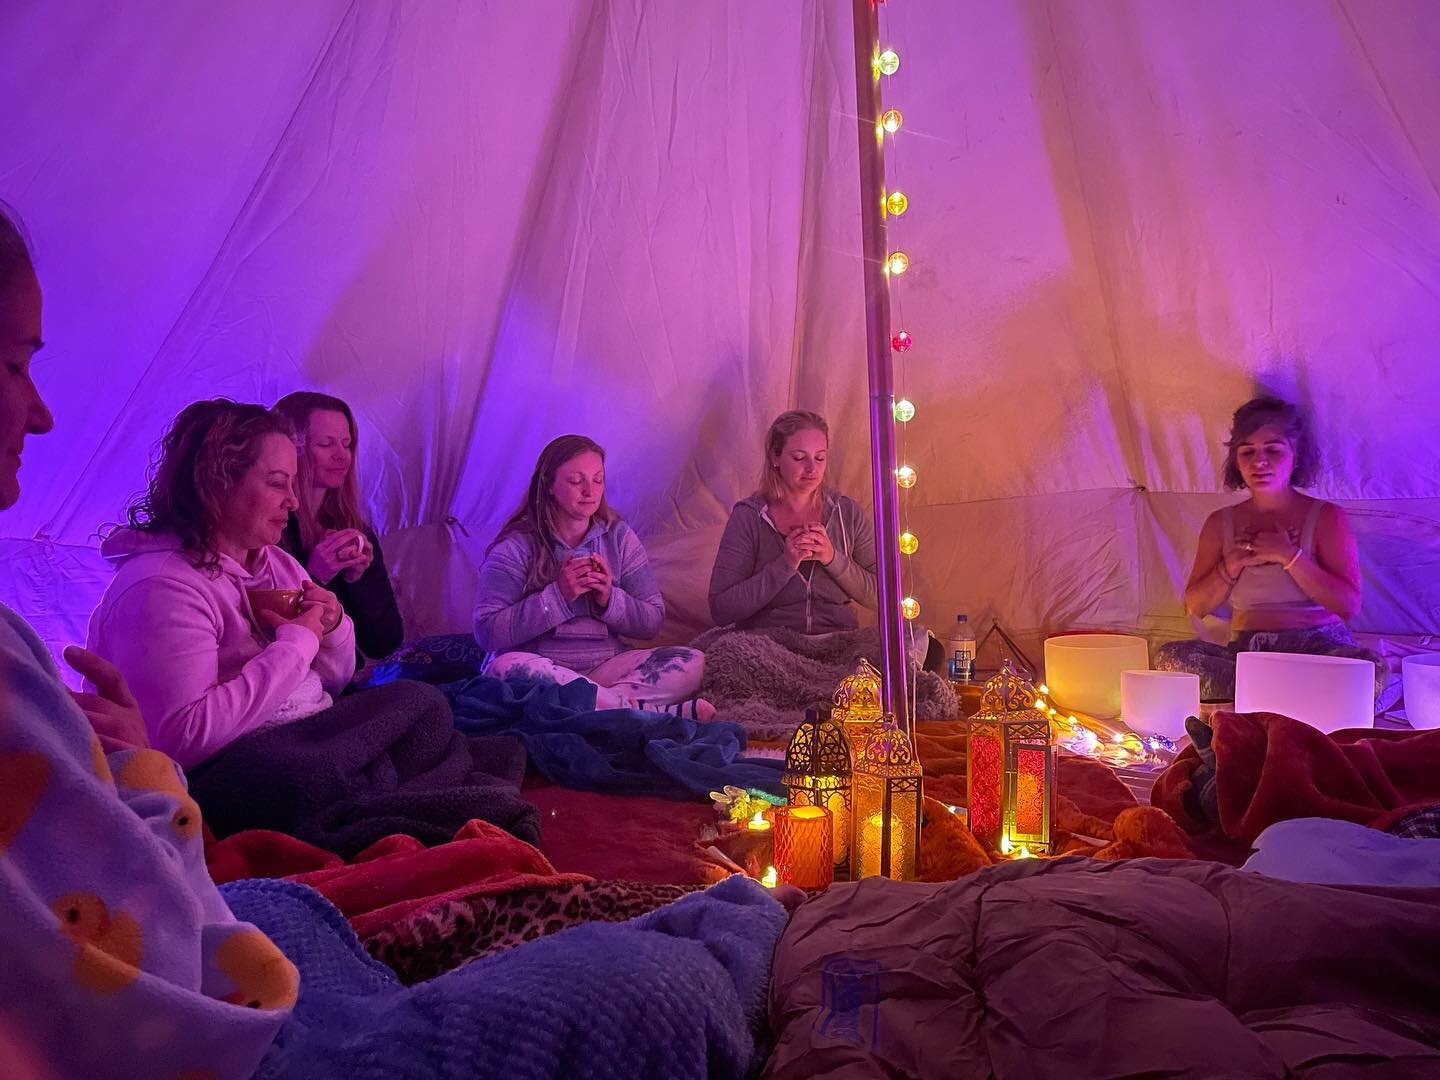 A cacao-fueled sound bath for a birthday retreat this weekend! 🎂💜 @cacaoceremony 

Our 16&rsquo; glamping tent is available for all stays, and utilizing it for a healing sound bath ceremony to unwind after a day exploring the desert is so soothing!